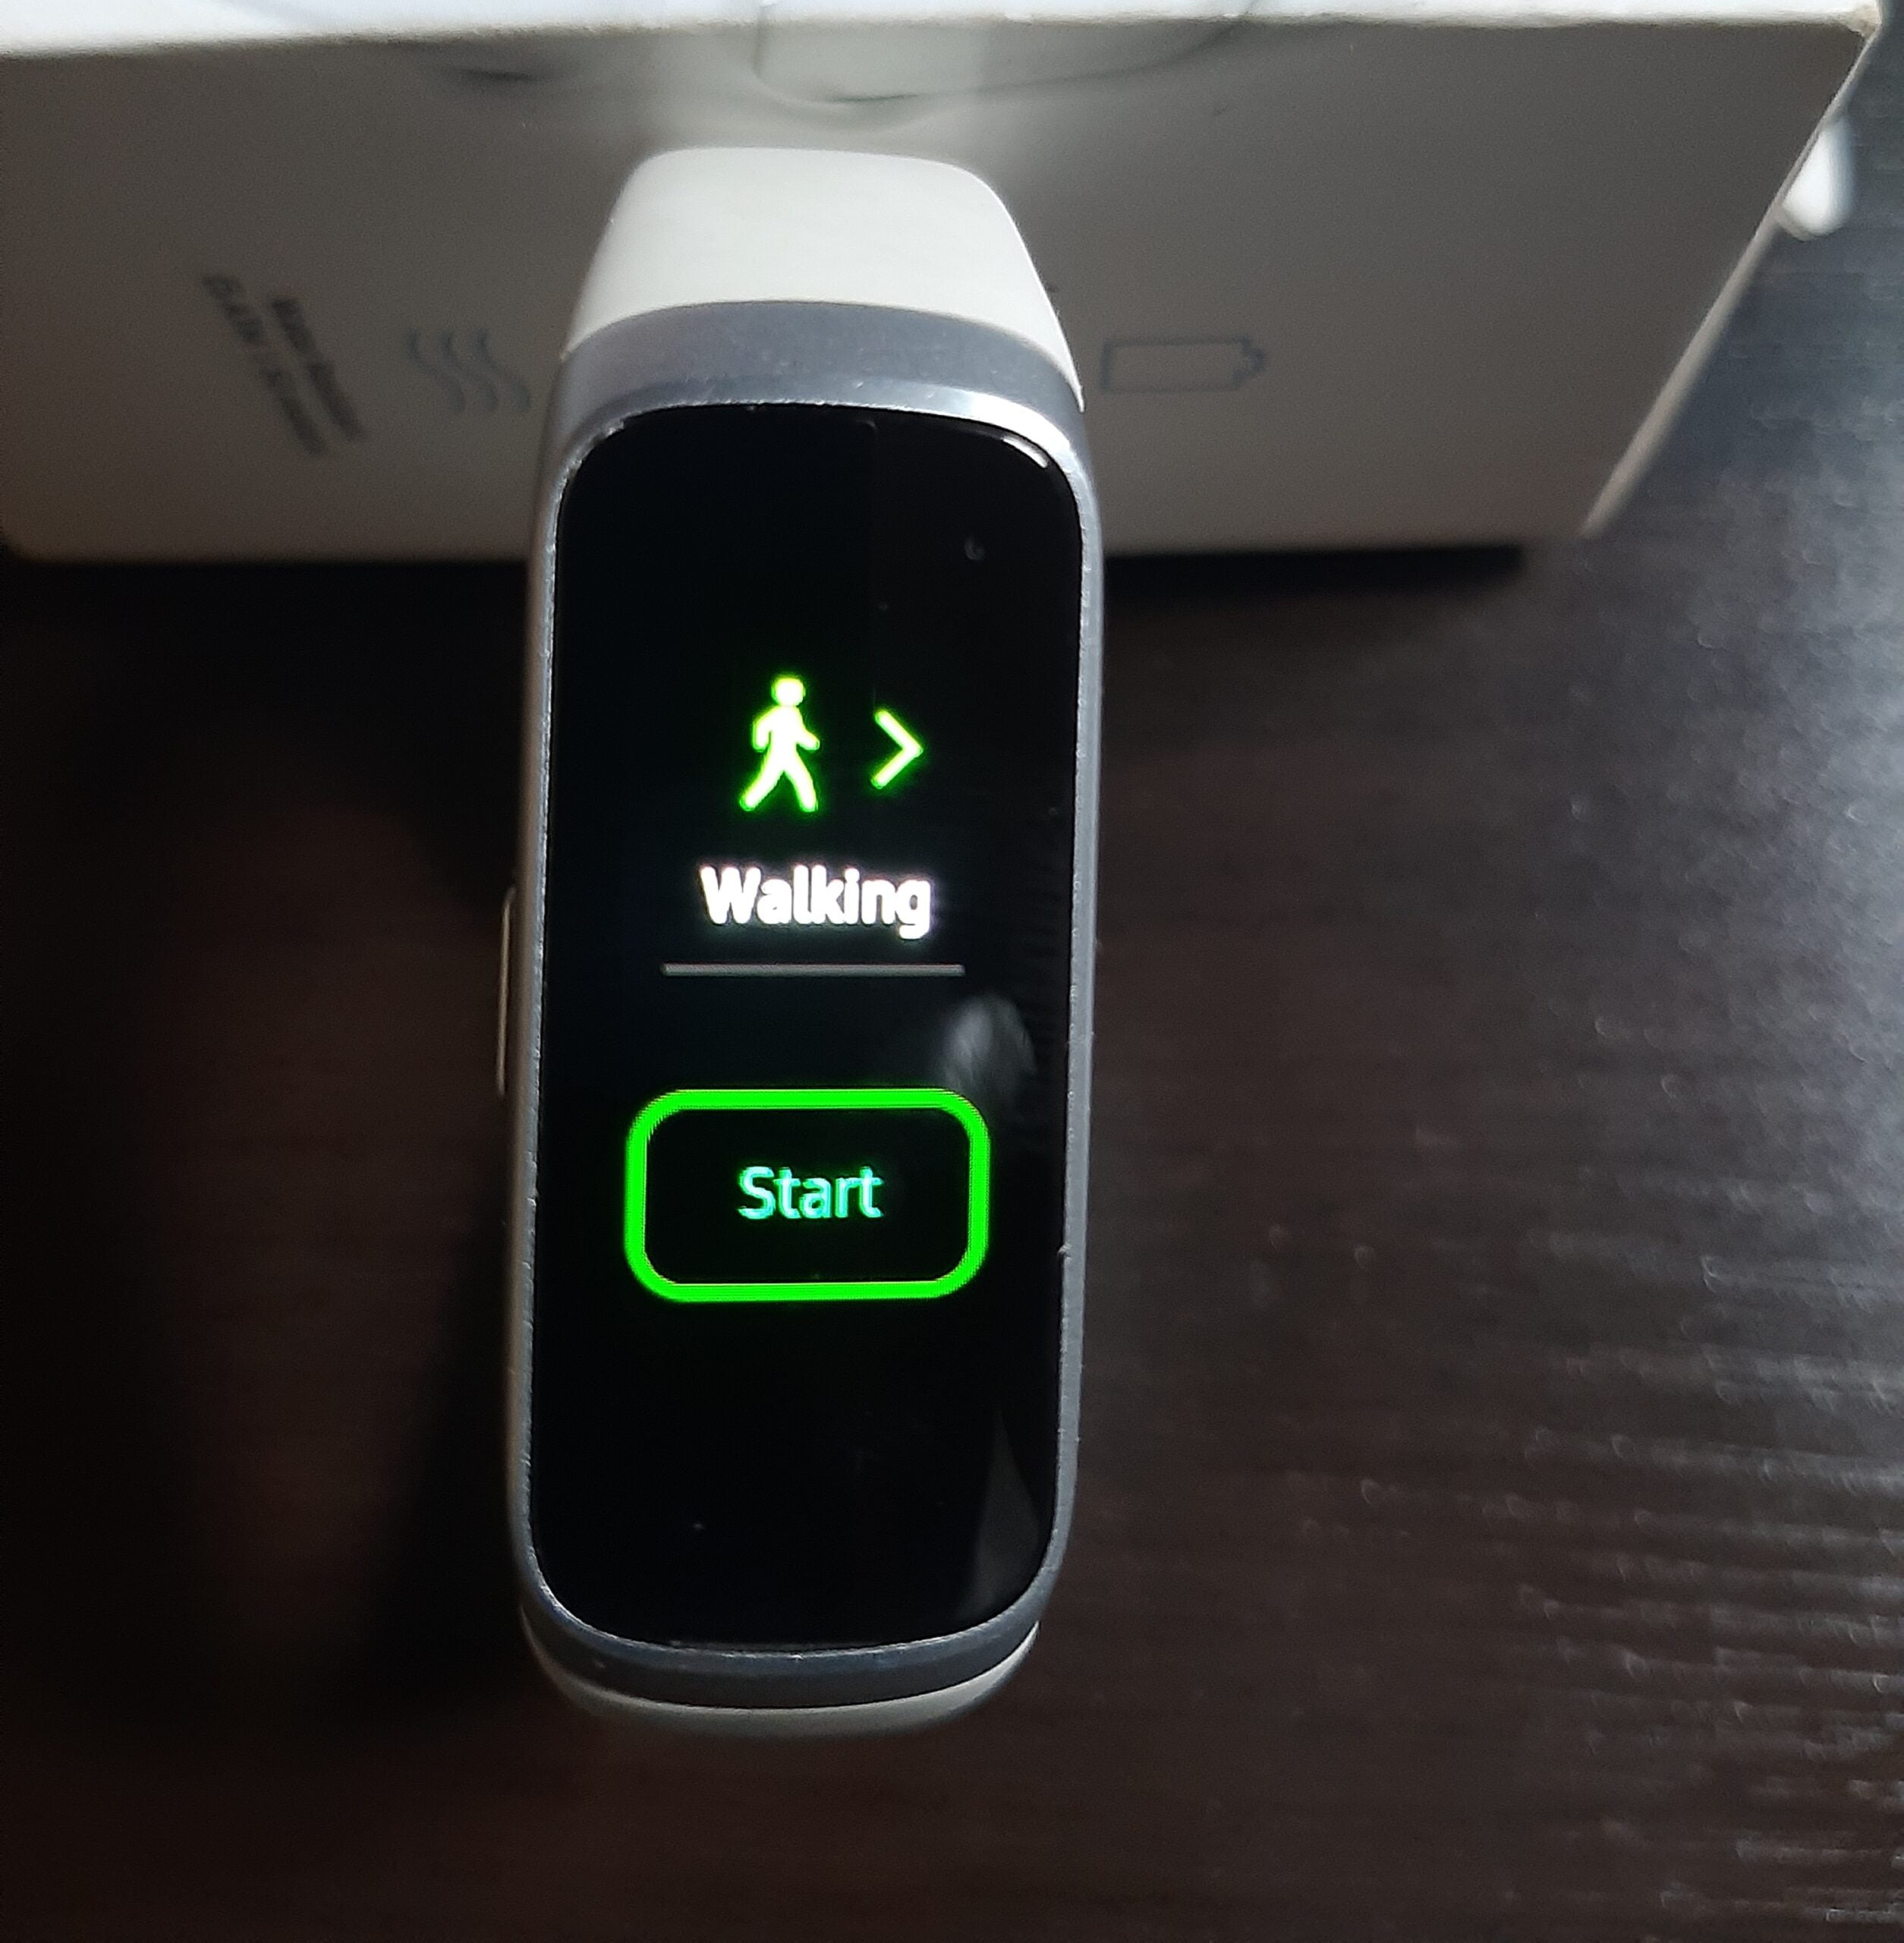 Samsung Galaxy Fit indepth review